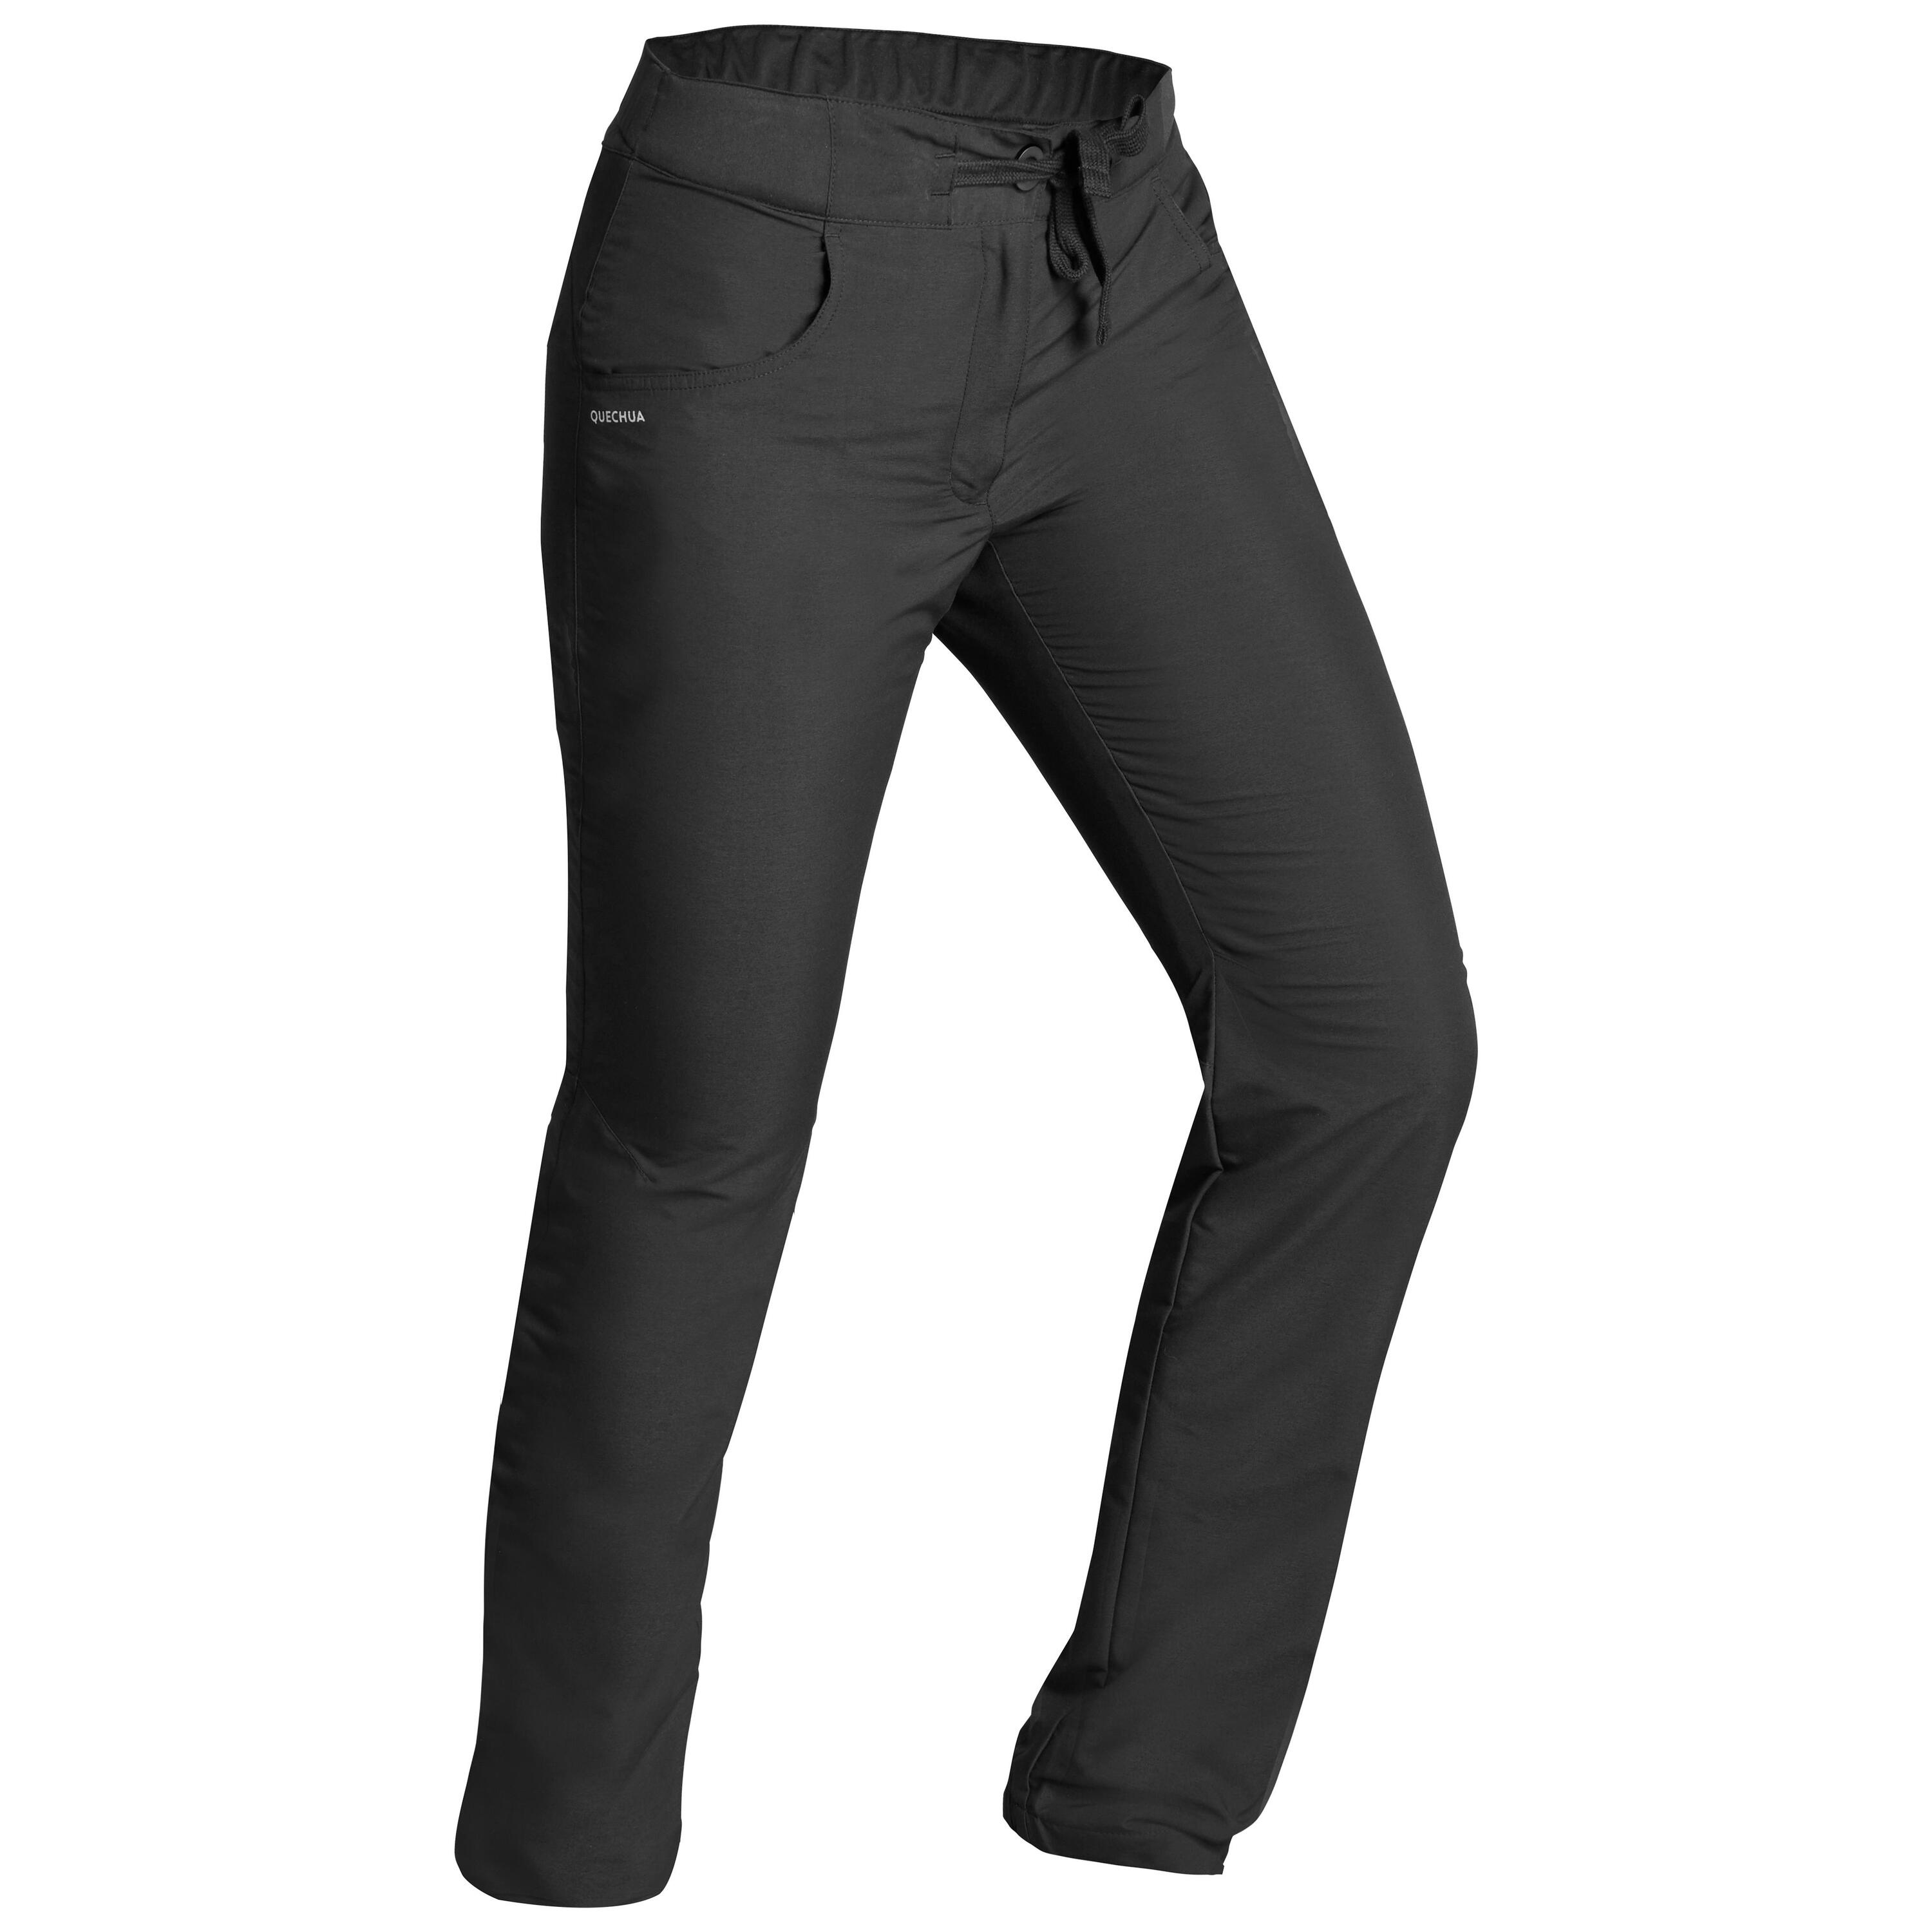 WOMEN'S HIKING WARM WATER-REPELLENT TROUSERS - SH100   4/9